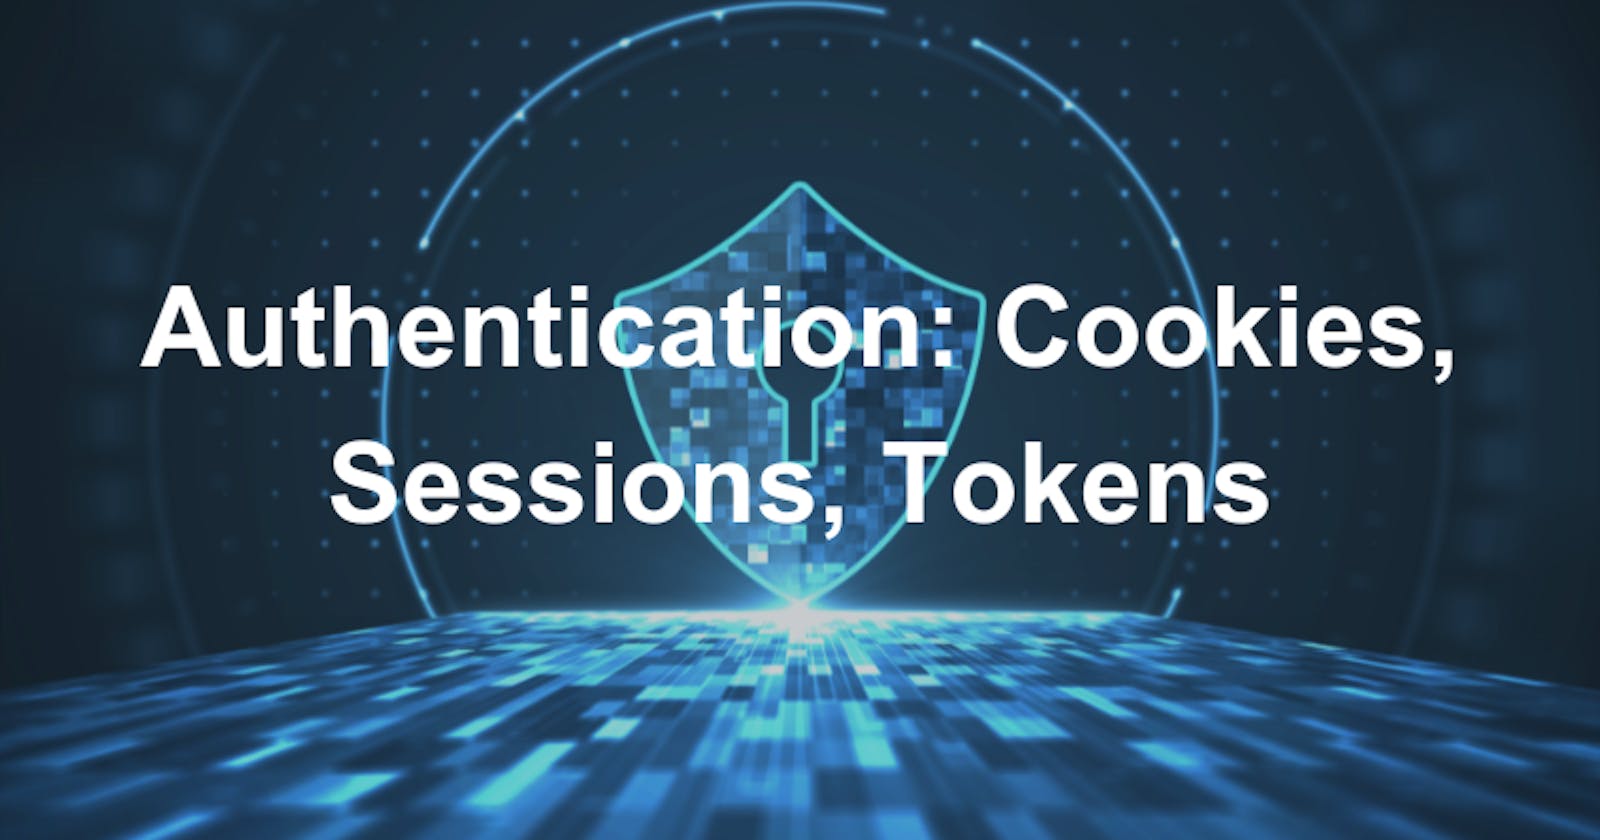 Fundamental Authentication Concepts - Cookies, Sessions, Tokens